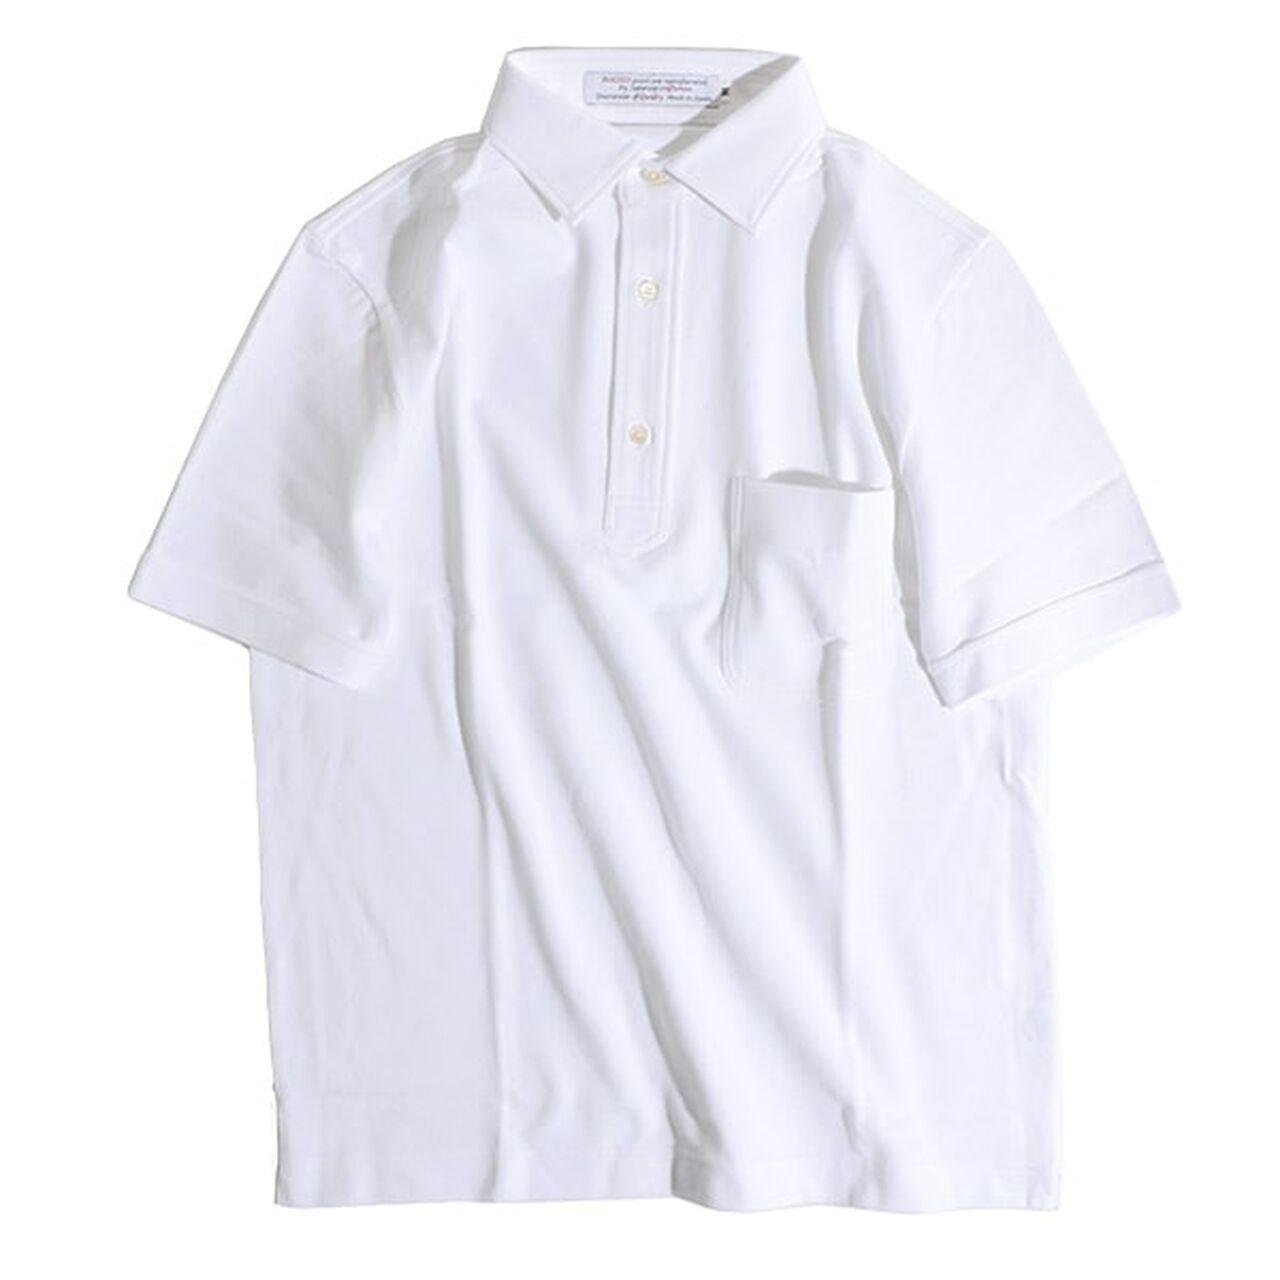 Premium Cotton Widespread Polo Shirt/Short Sleeves,White, large image number 0